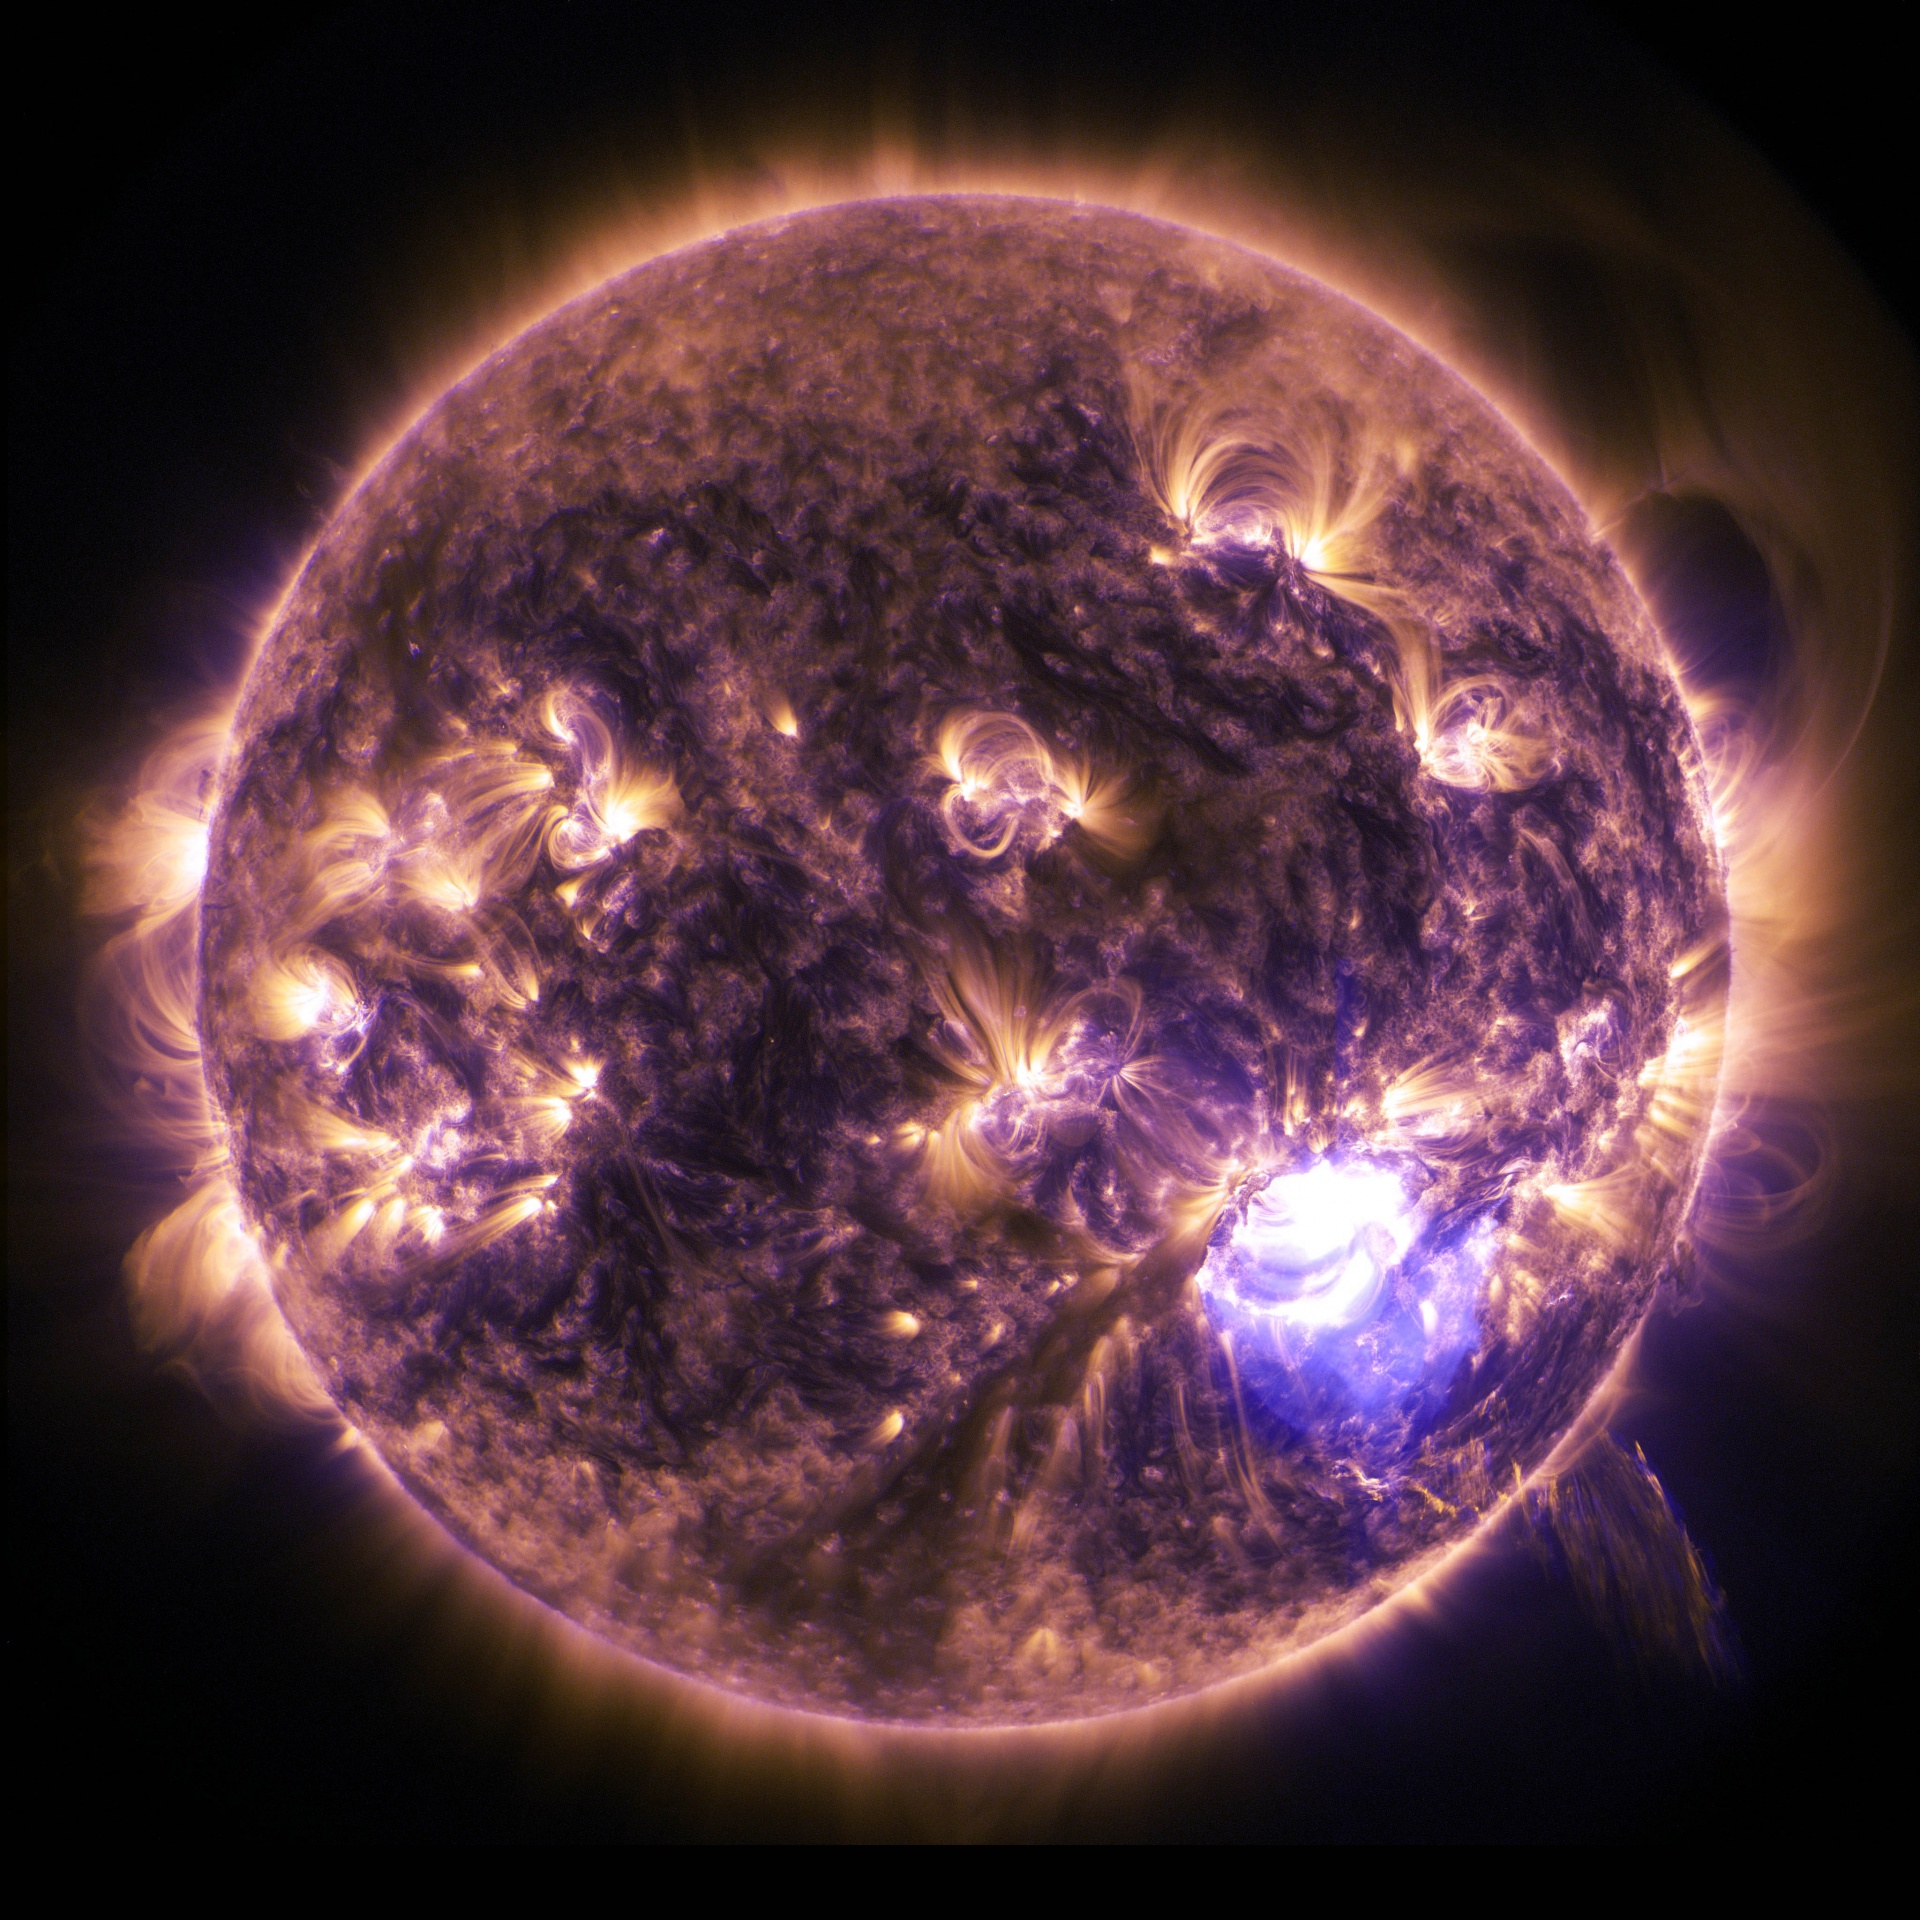 View of the sun yielding an intense solar flare